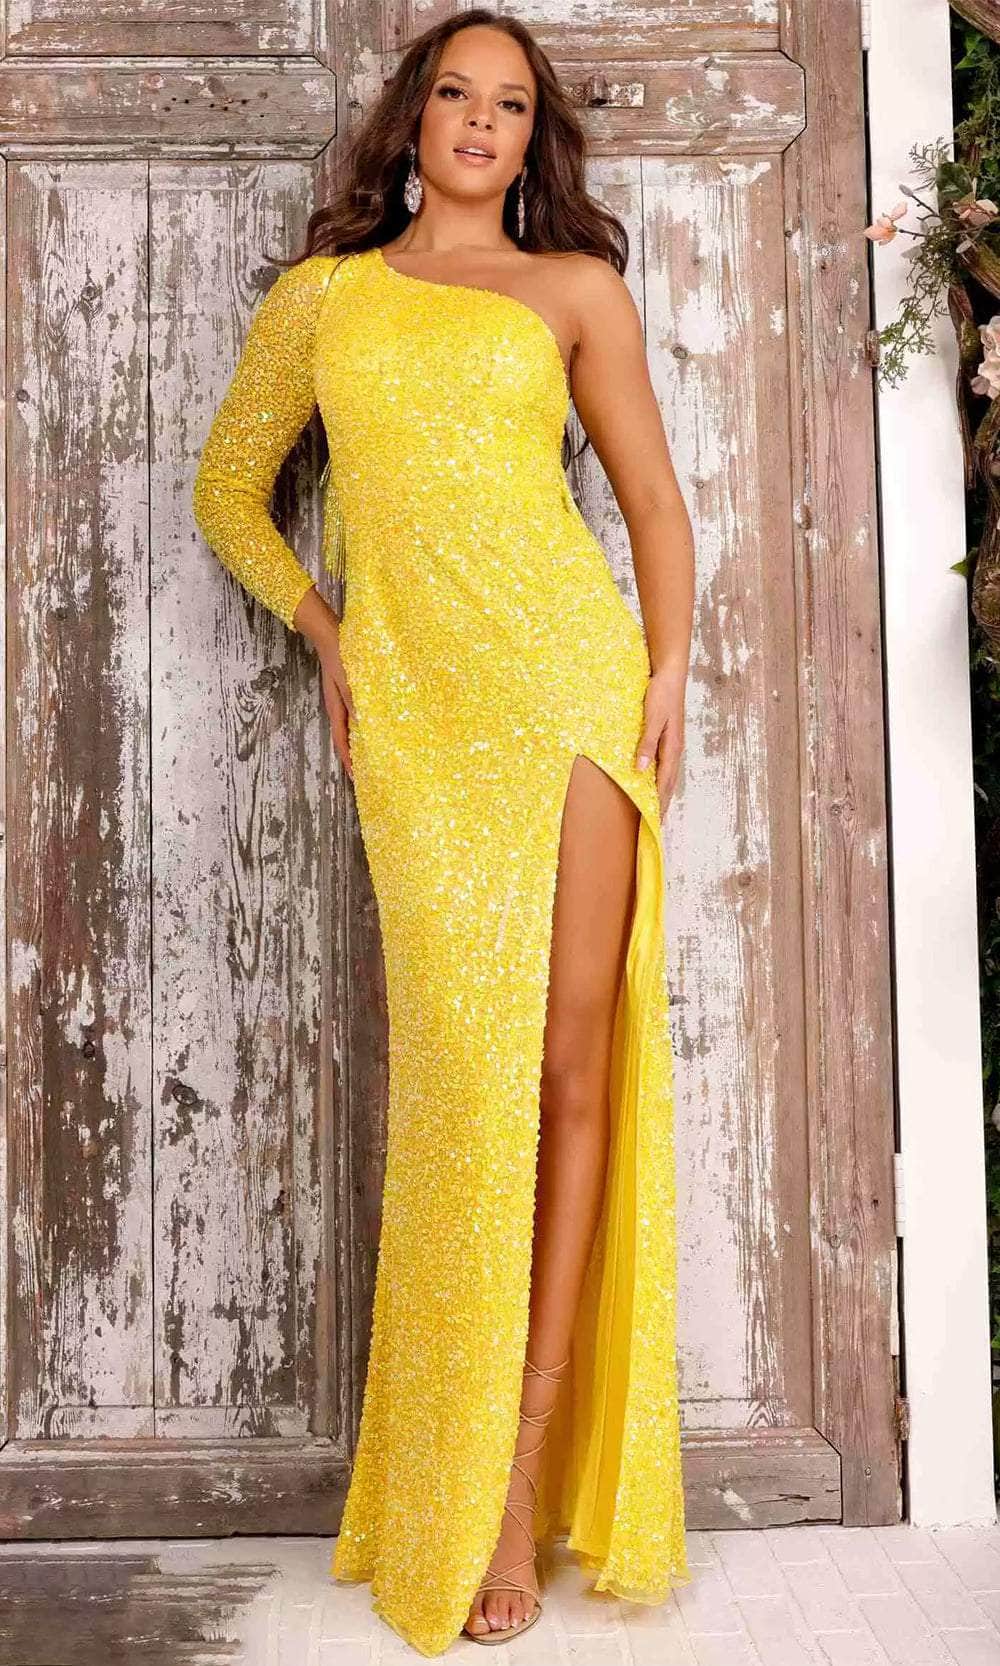 Aleta Couture 881 - Long Sleeve Sequin Embellished Prom Gown
